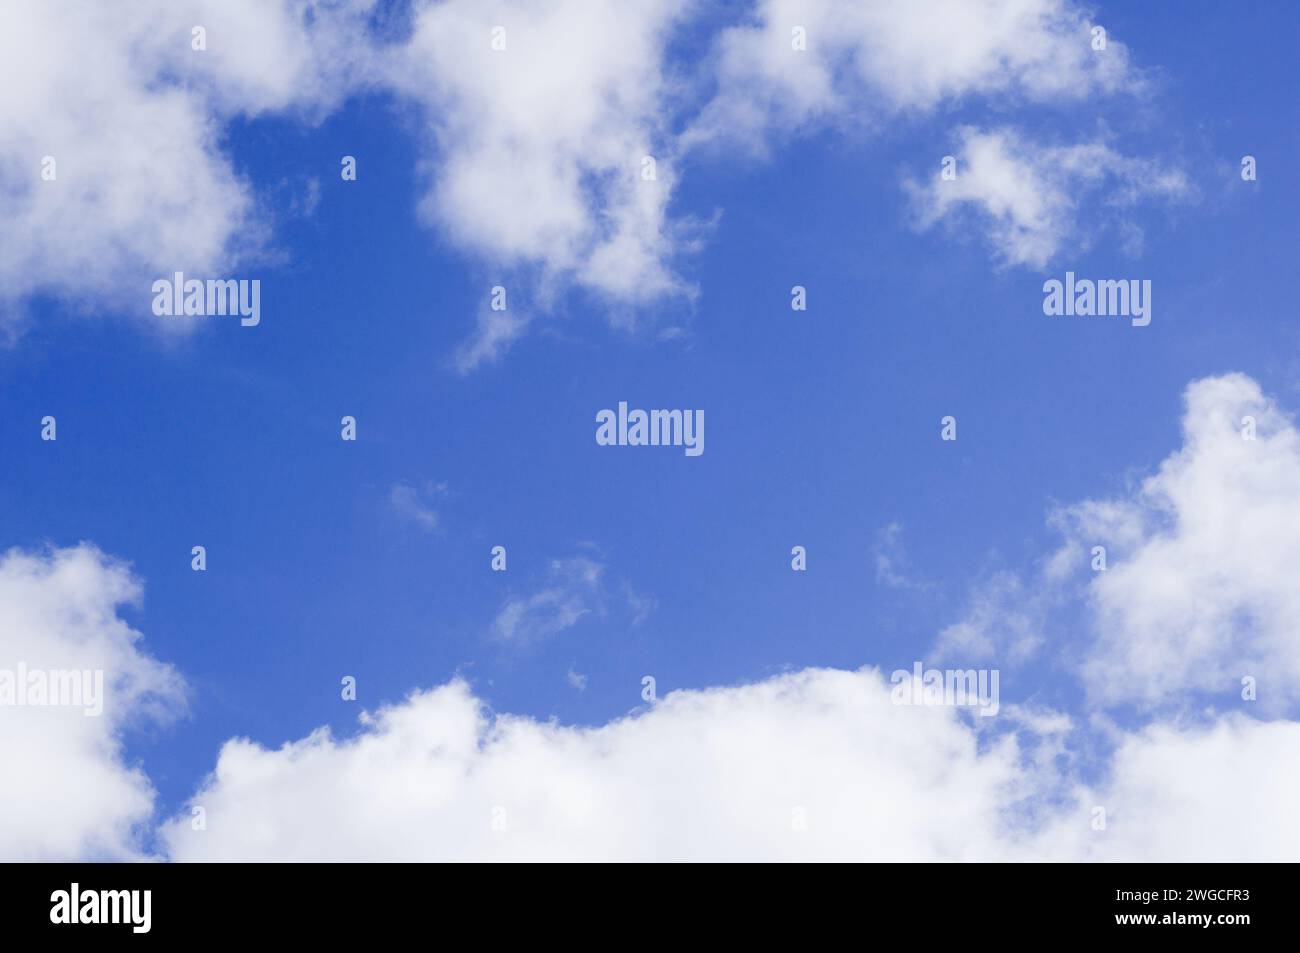 A closeup of cloud formations against the blue sky Stock Photo